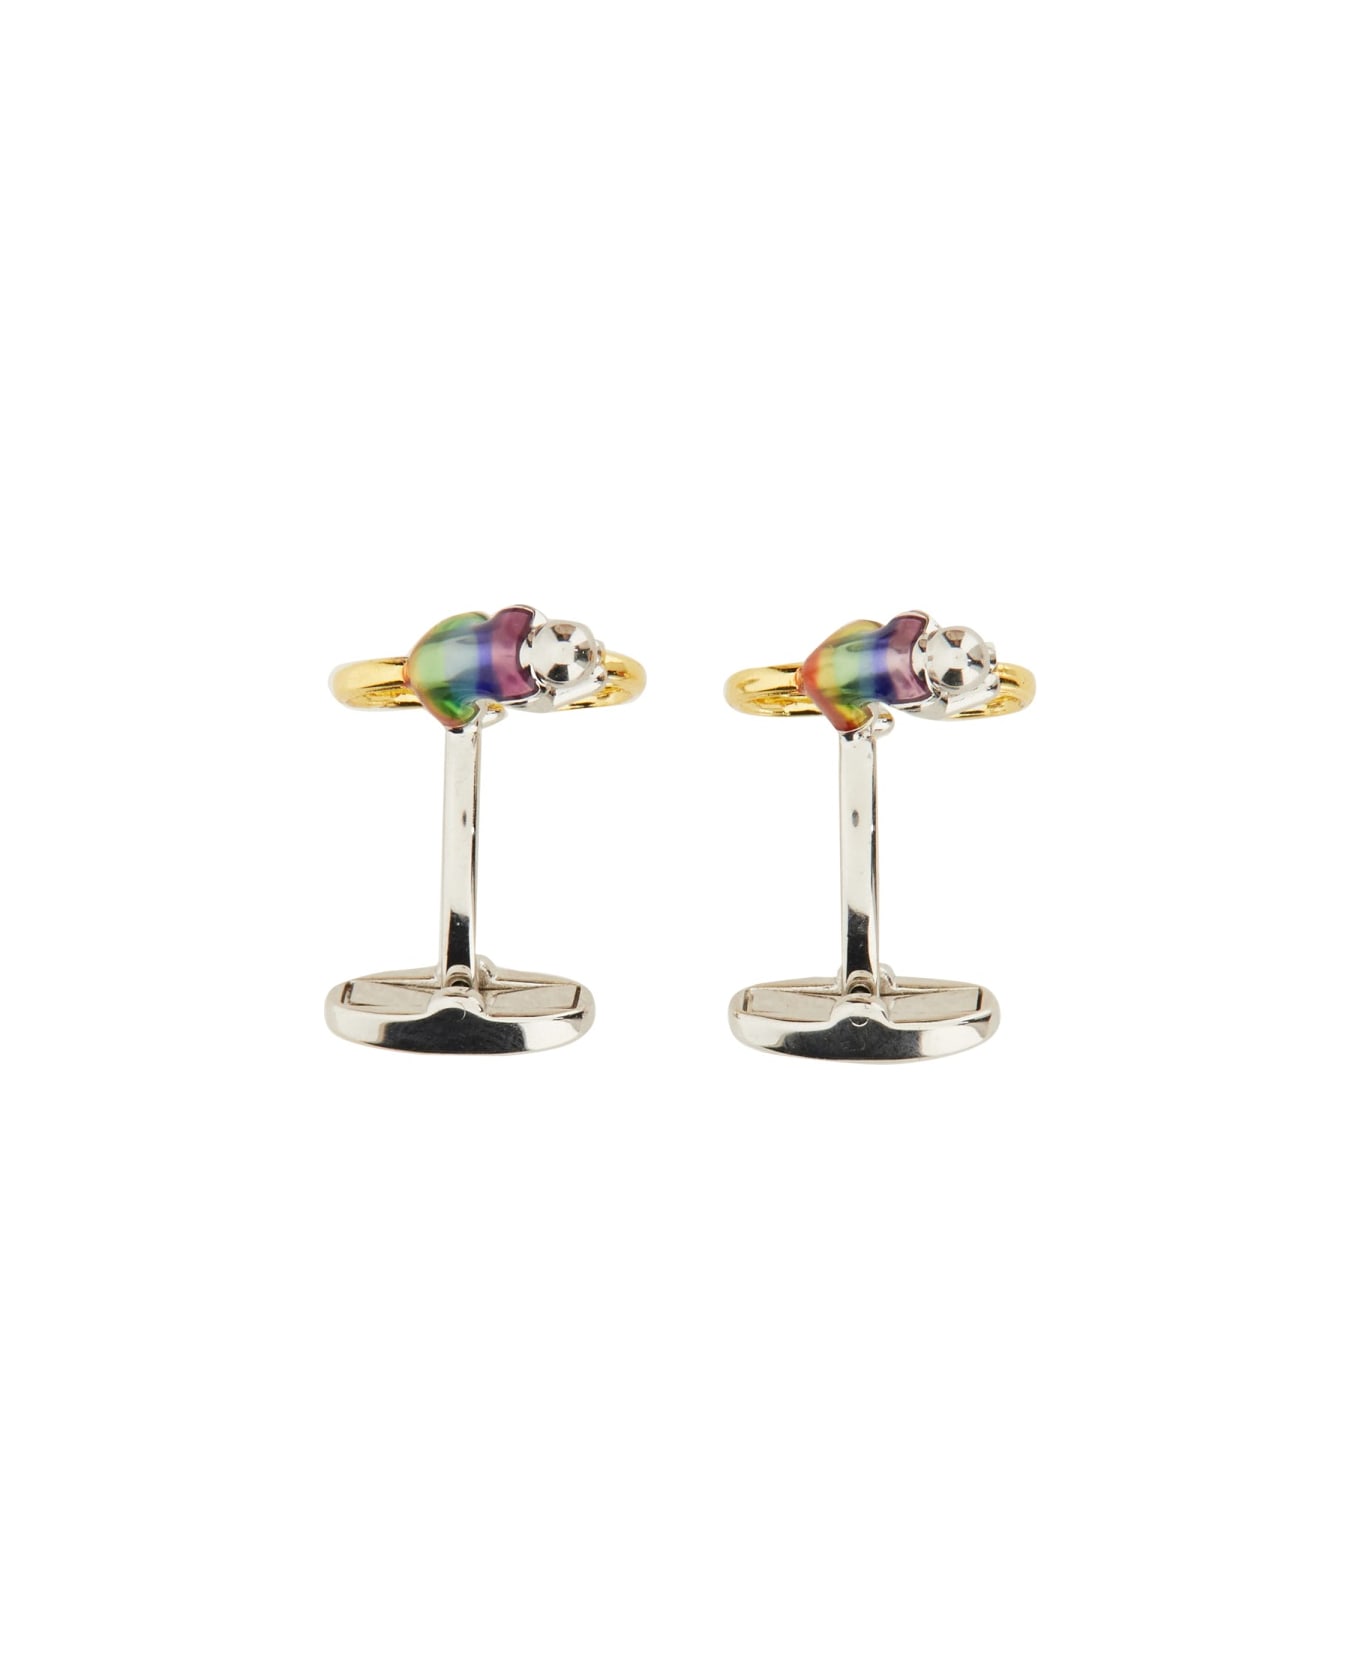 Paul Smith Cycle Twins - MULTICOLOUR